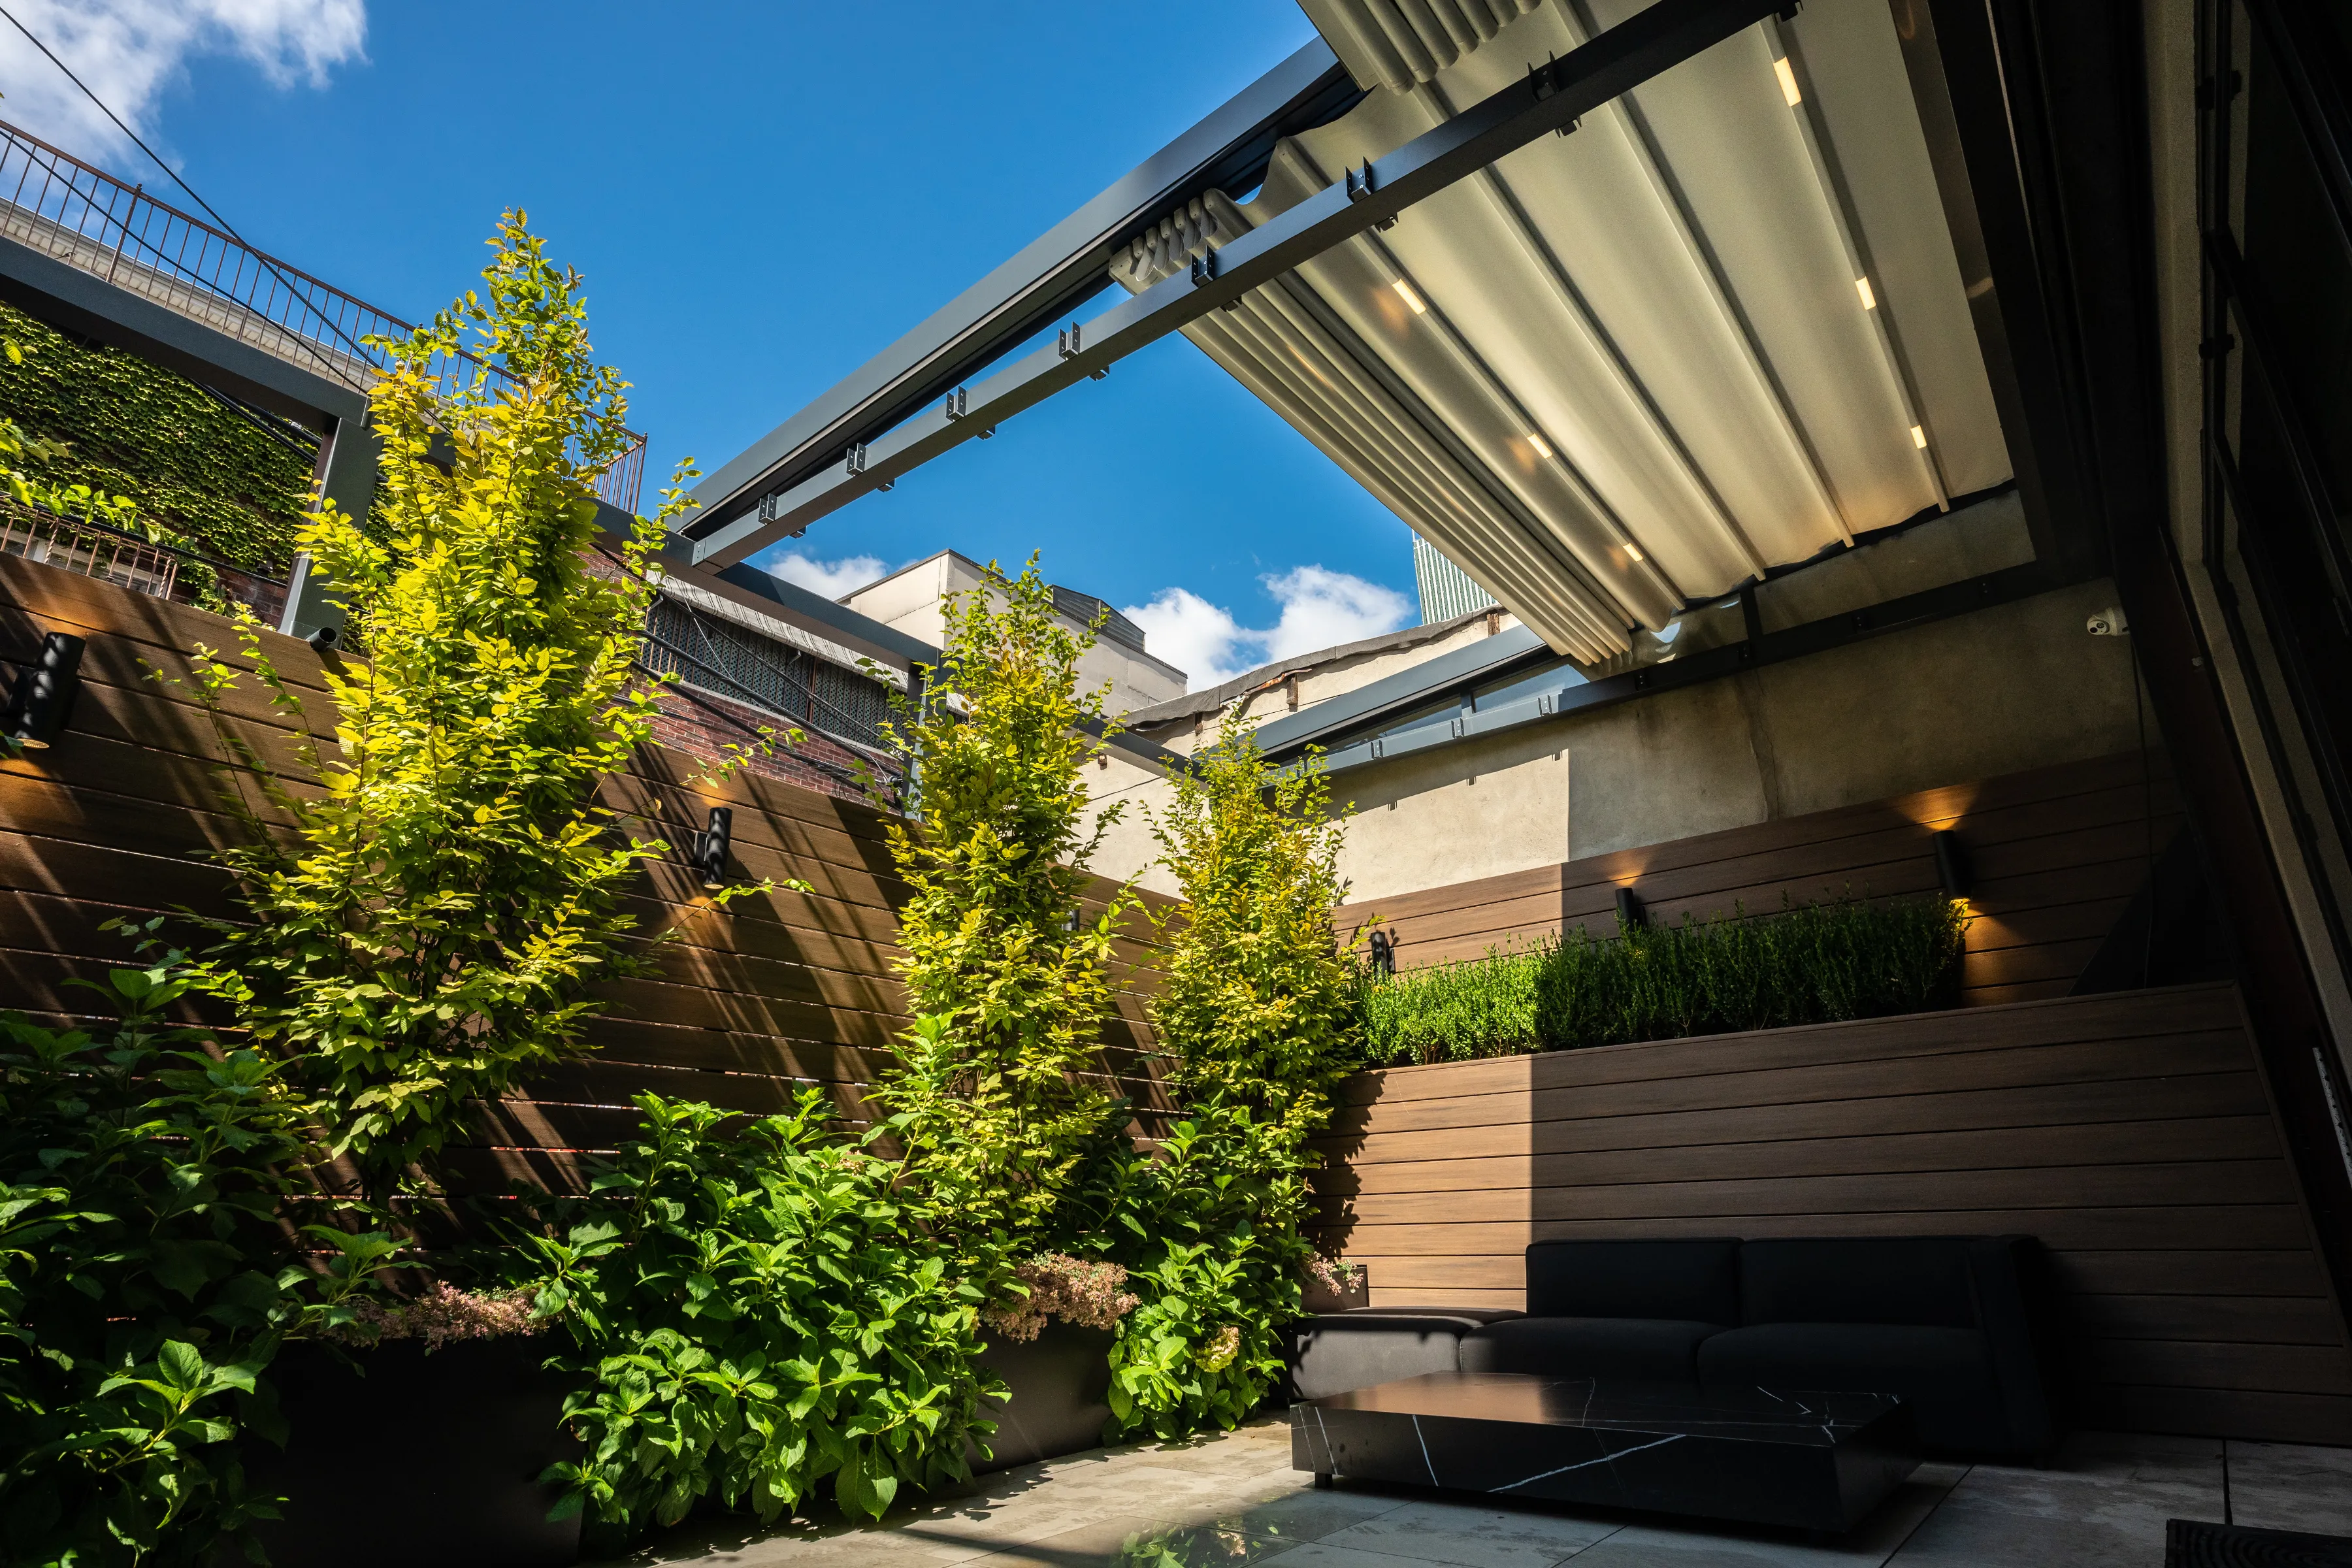 Featured image: Half-open Pergola in the backyard of the house - Read full post: Transforming Your Backyard with a Pergola and Retractable Roof